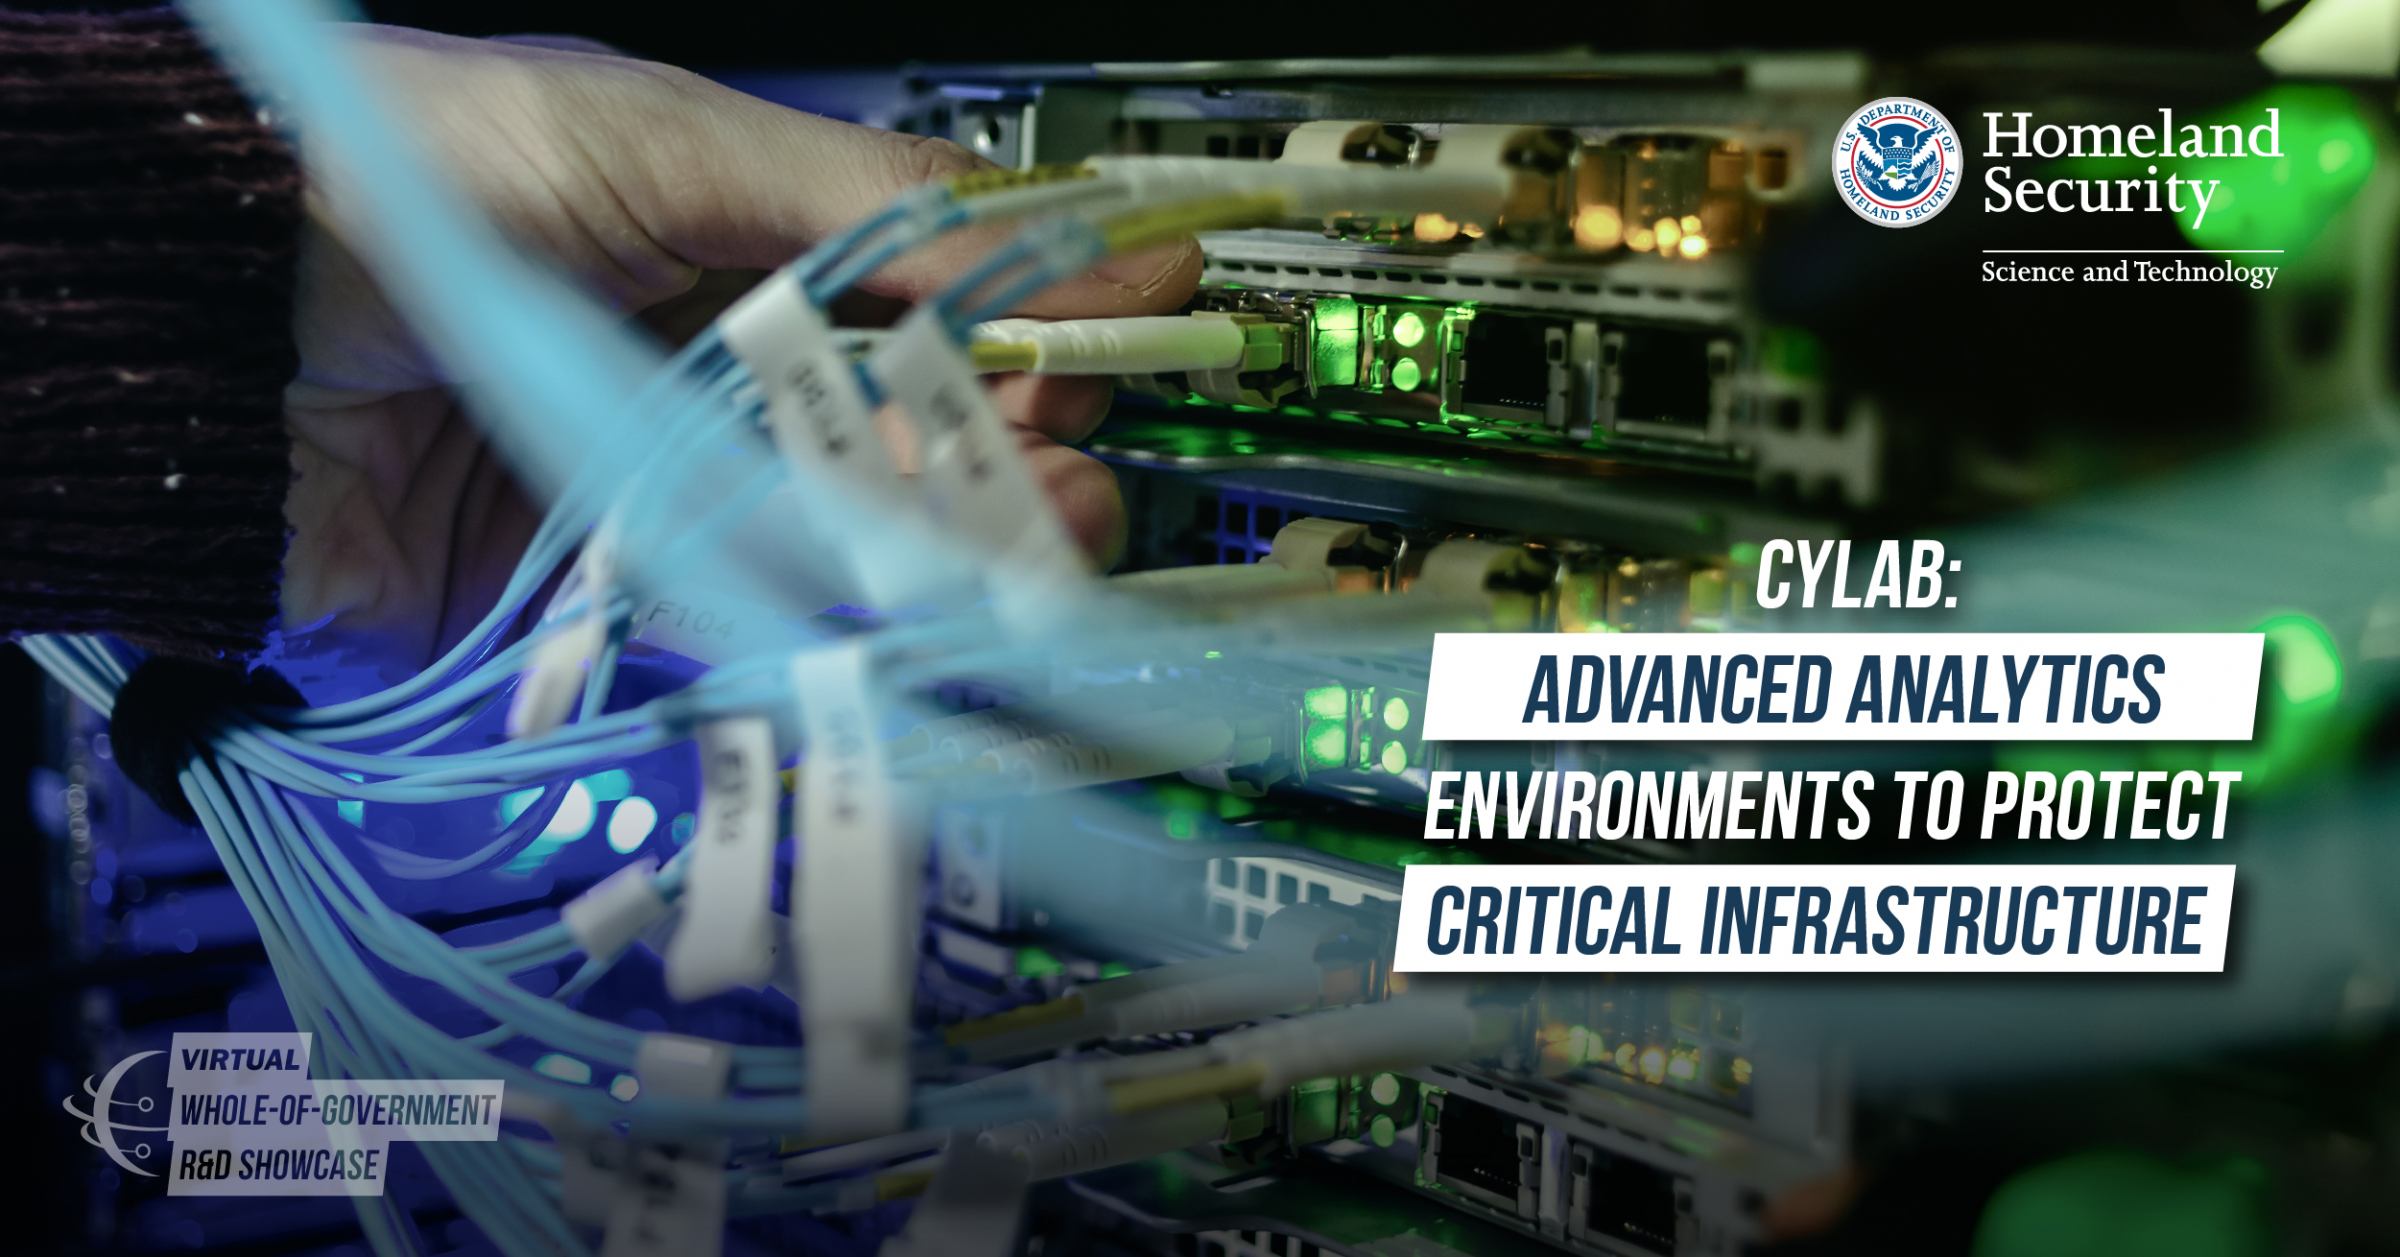 Expert Panel 2: CyLab: Advanced Analytics Environments to Protect Critical Infrastructure